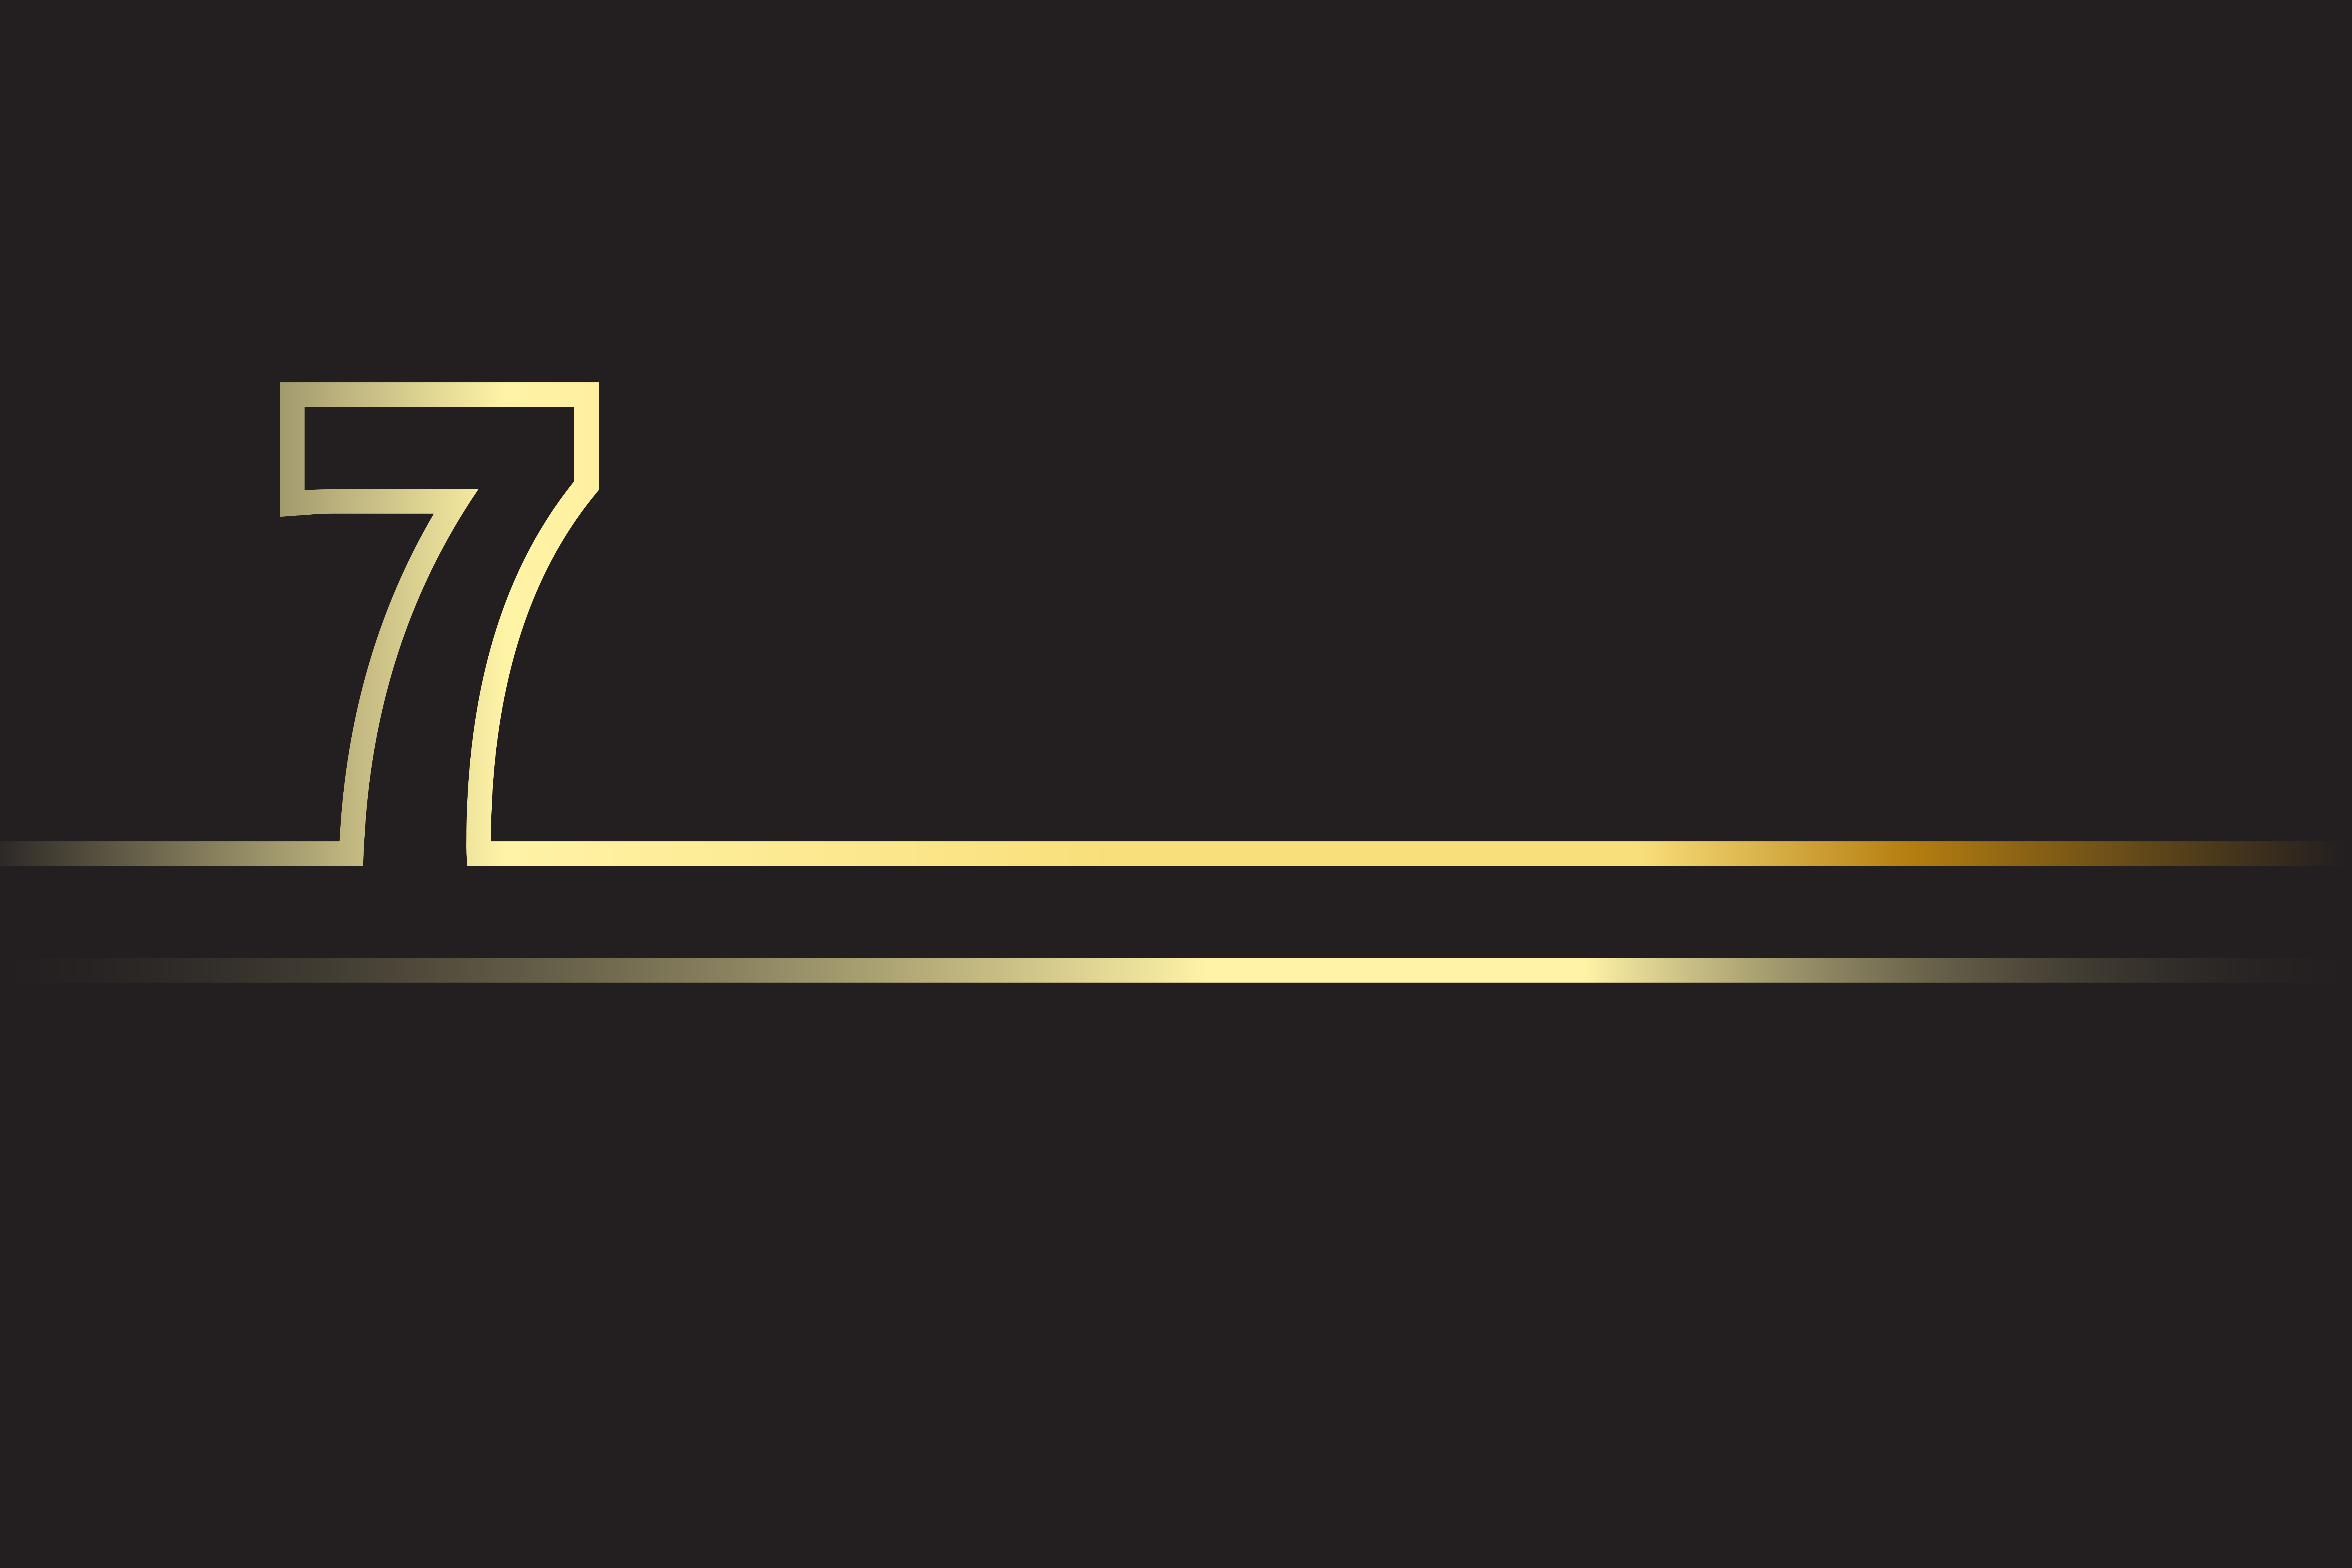 The image shows a stylized number 7 with a gold outline, set against a black background.